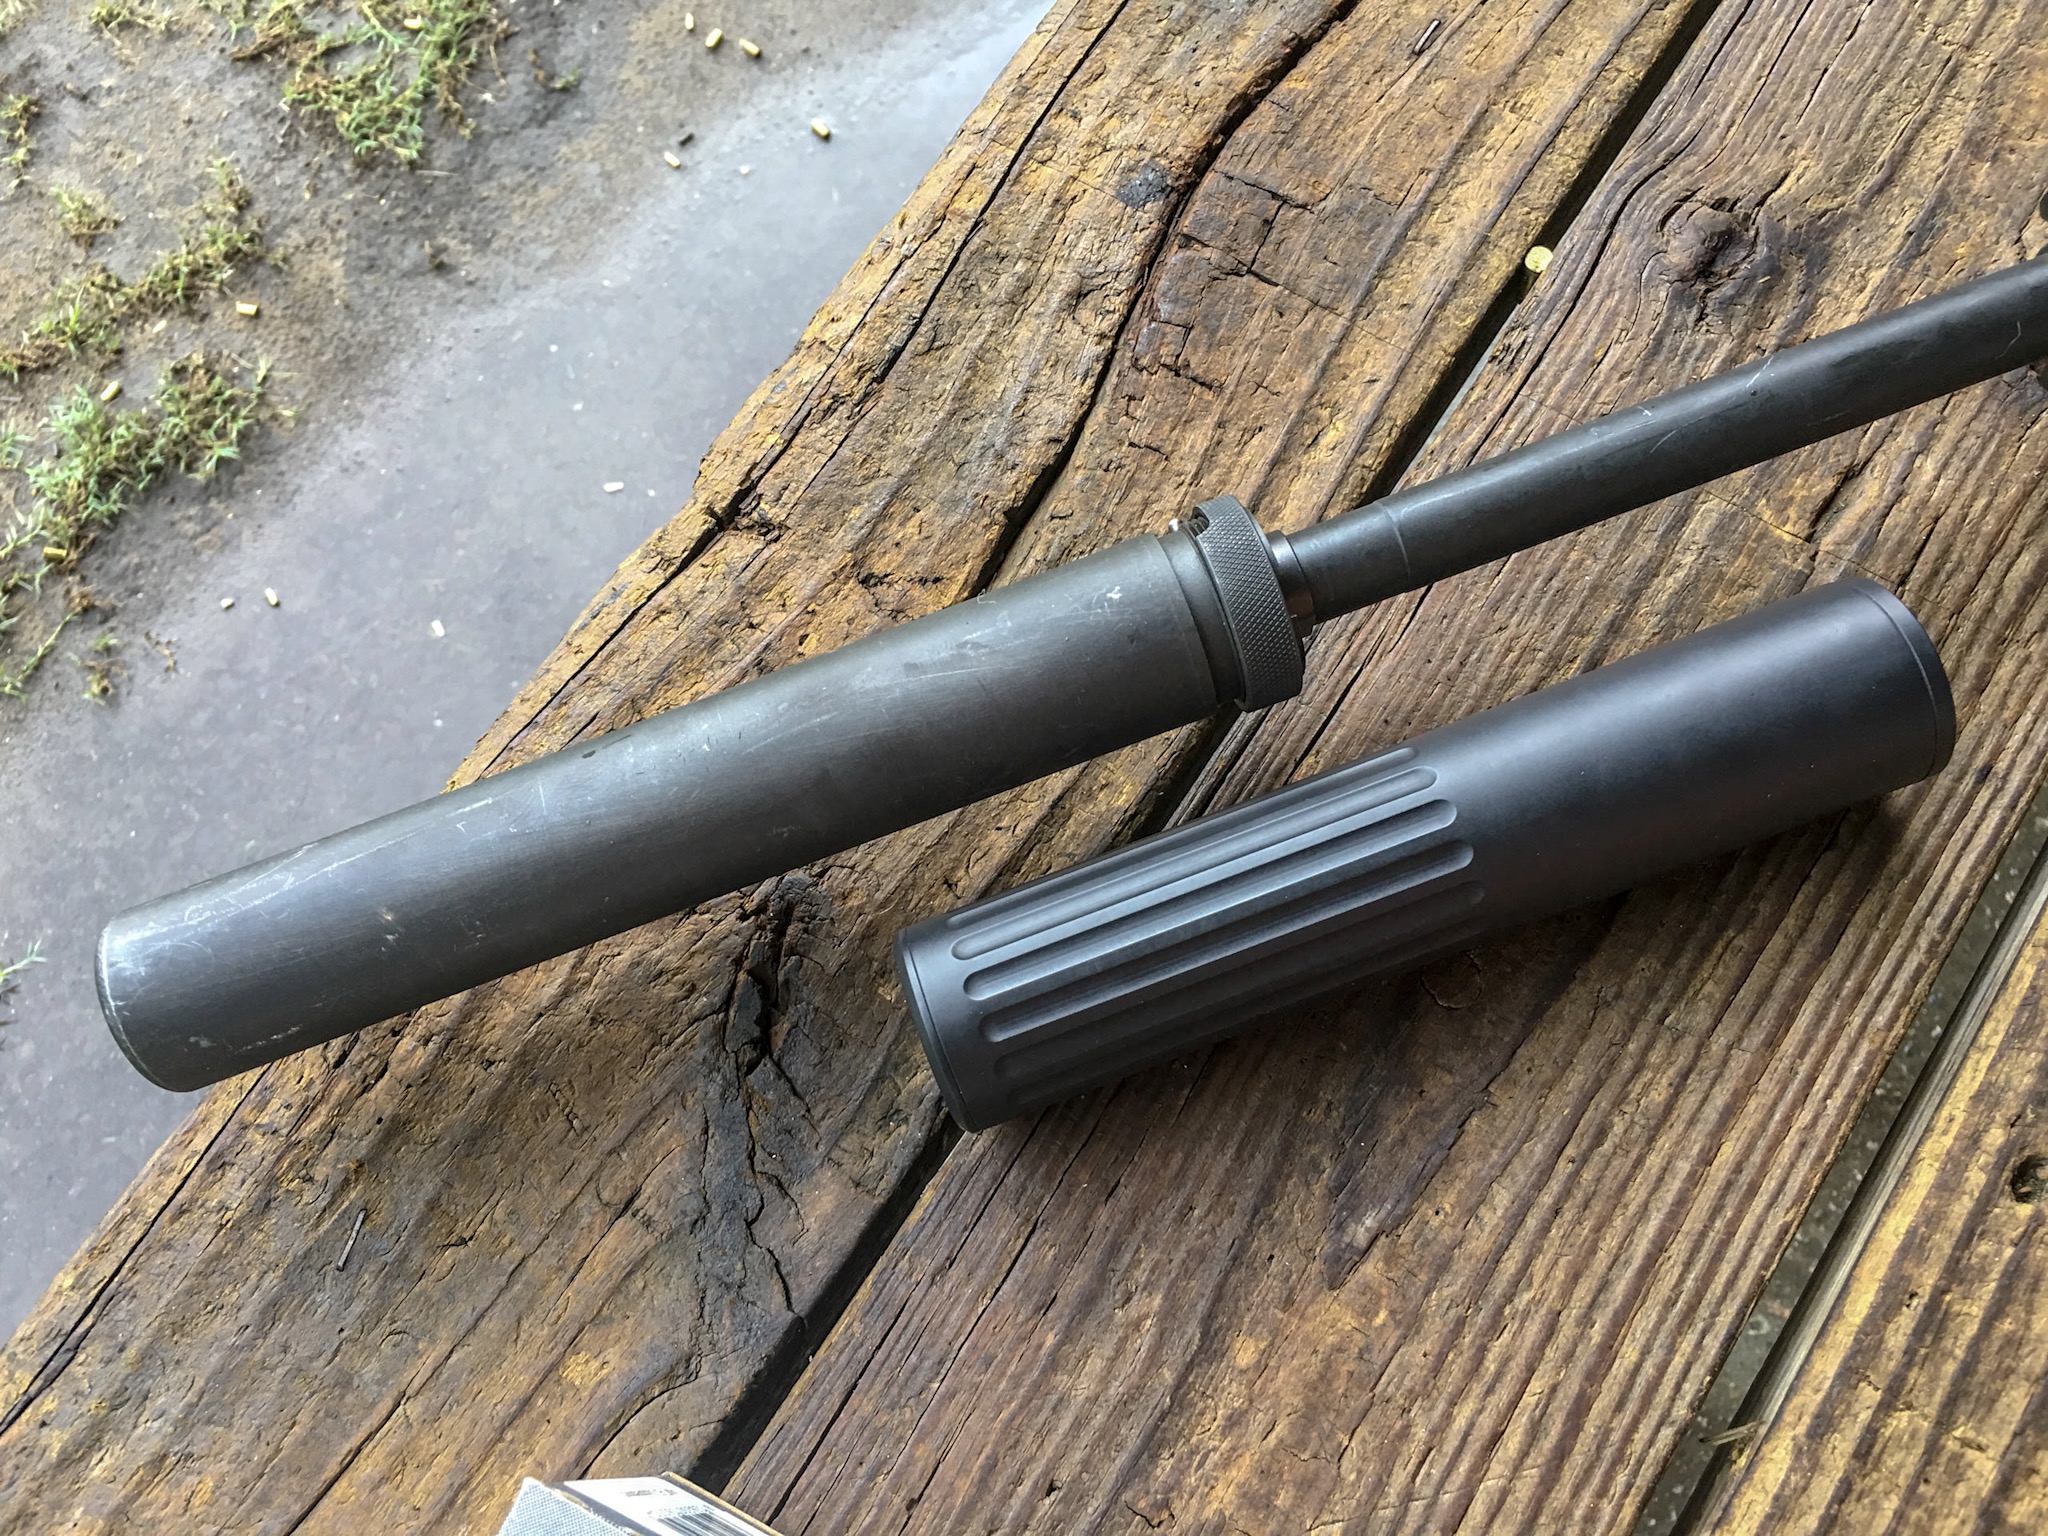 Do suppressors affect accuracy?